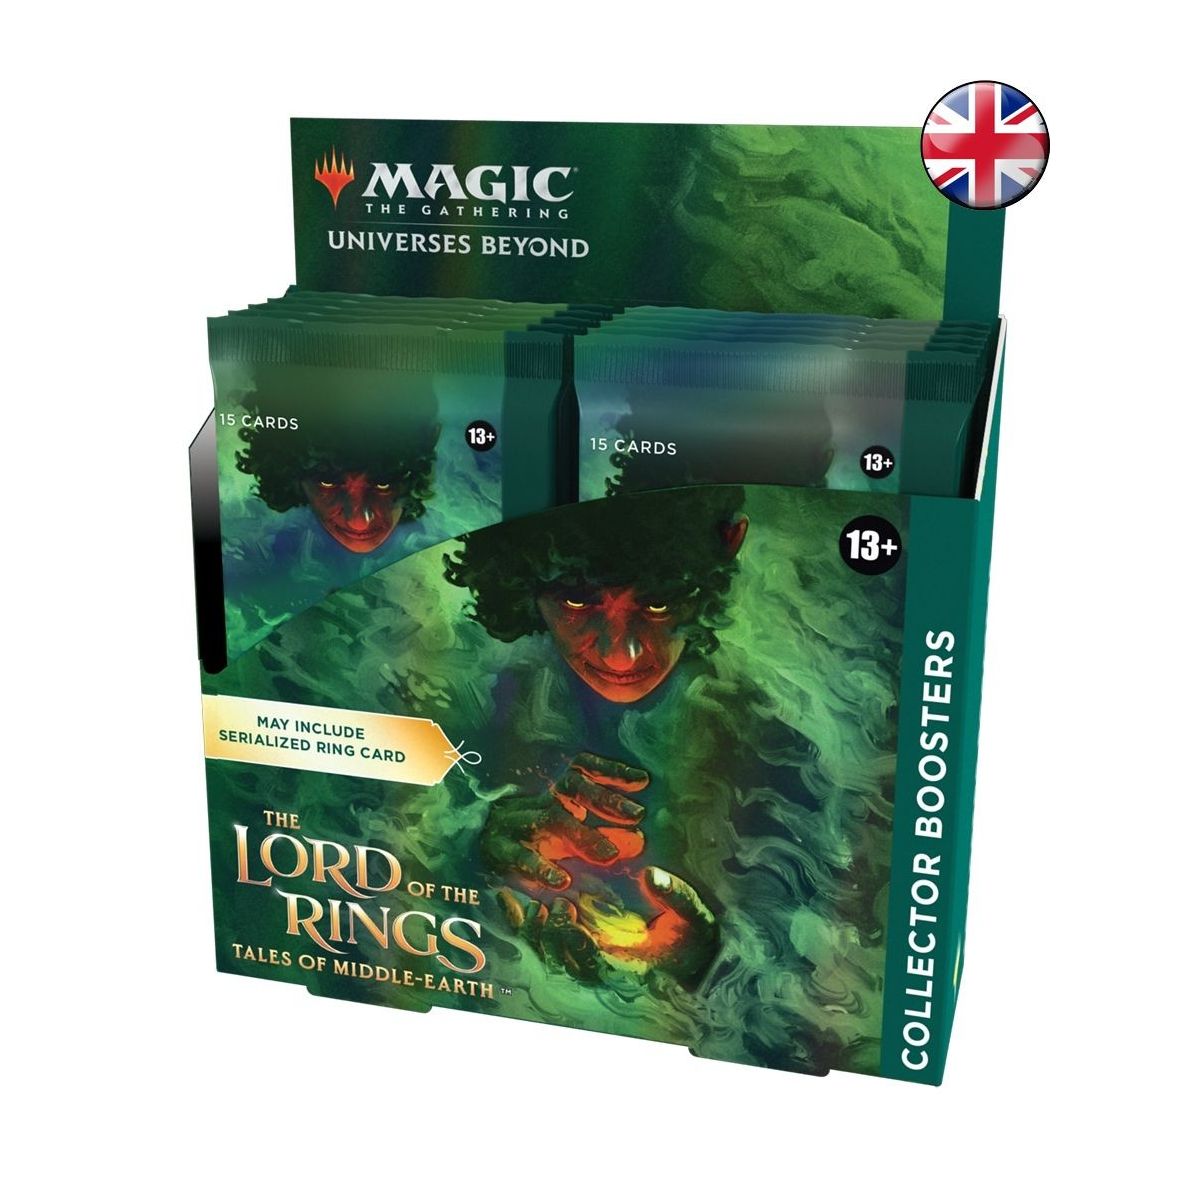 Magic The Gathering - Booster Box - Collector - The Lord of the Rings: Chronicles of Middle-earth - EN